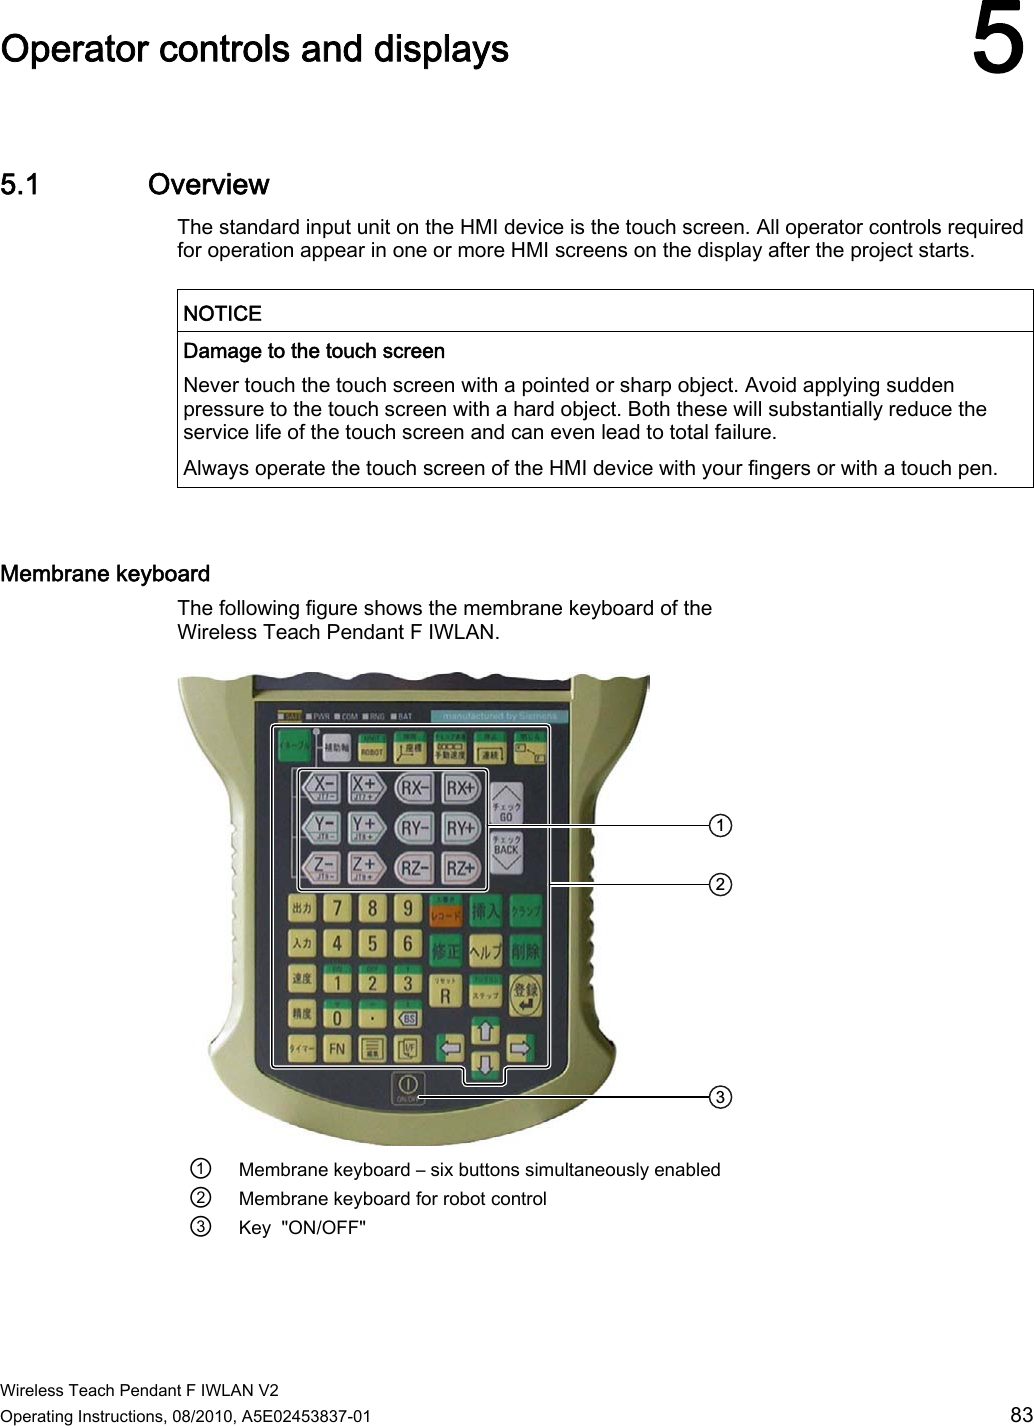  Wireless Teach Pendant F IWLAN V2 Operating Instructions, 08/2010, A5E02453837-01  83 Operator controls and displays 55.1 Overview The standard input unit on the HMI device is the touch screen. All operator controls required for operation appear in one or more HMI screens on the display after the project starts.  NOTICE  Damage to the touch screen Never touch the touch screen with a pointed or sharp object. Avoid applying sudden pressure to the touch screen with a hard object. Both these will substantially reduce the service life of the touch screen and can even lead to total failure. Always operate the touch screen of the HMI device with your fingers or with a touch pen.  Membrane keyboard  The following figure shows the membrane keyboard of the Wireless Teach Pendant F IWLAN.  ①  Membrane keyboard – six buttons simultaneously enabled ②  Membrane keyboard for robot control ③  Key  &quot;ON/OFF&quot; PRELIMINARY II 1.7.2010